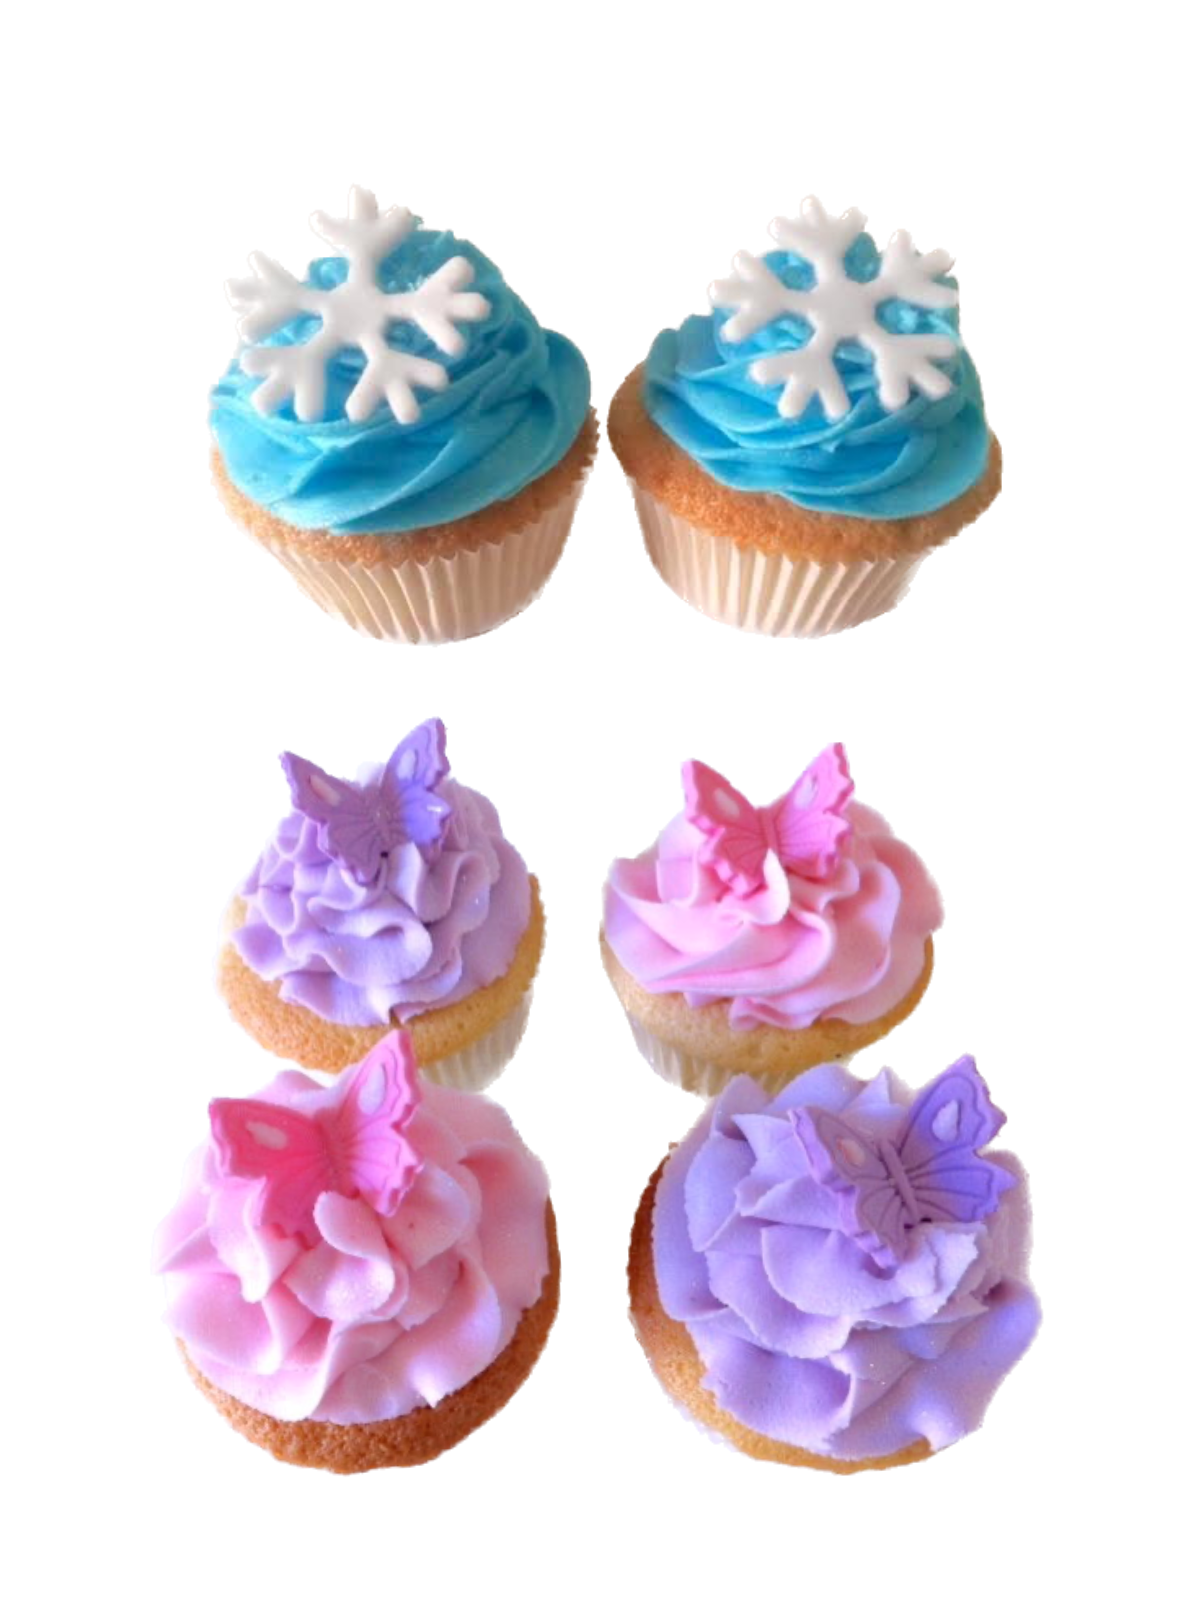 Three Four Upright Cut Out Gallery pink and Purple cupcakes.png